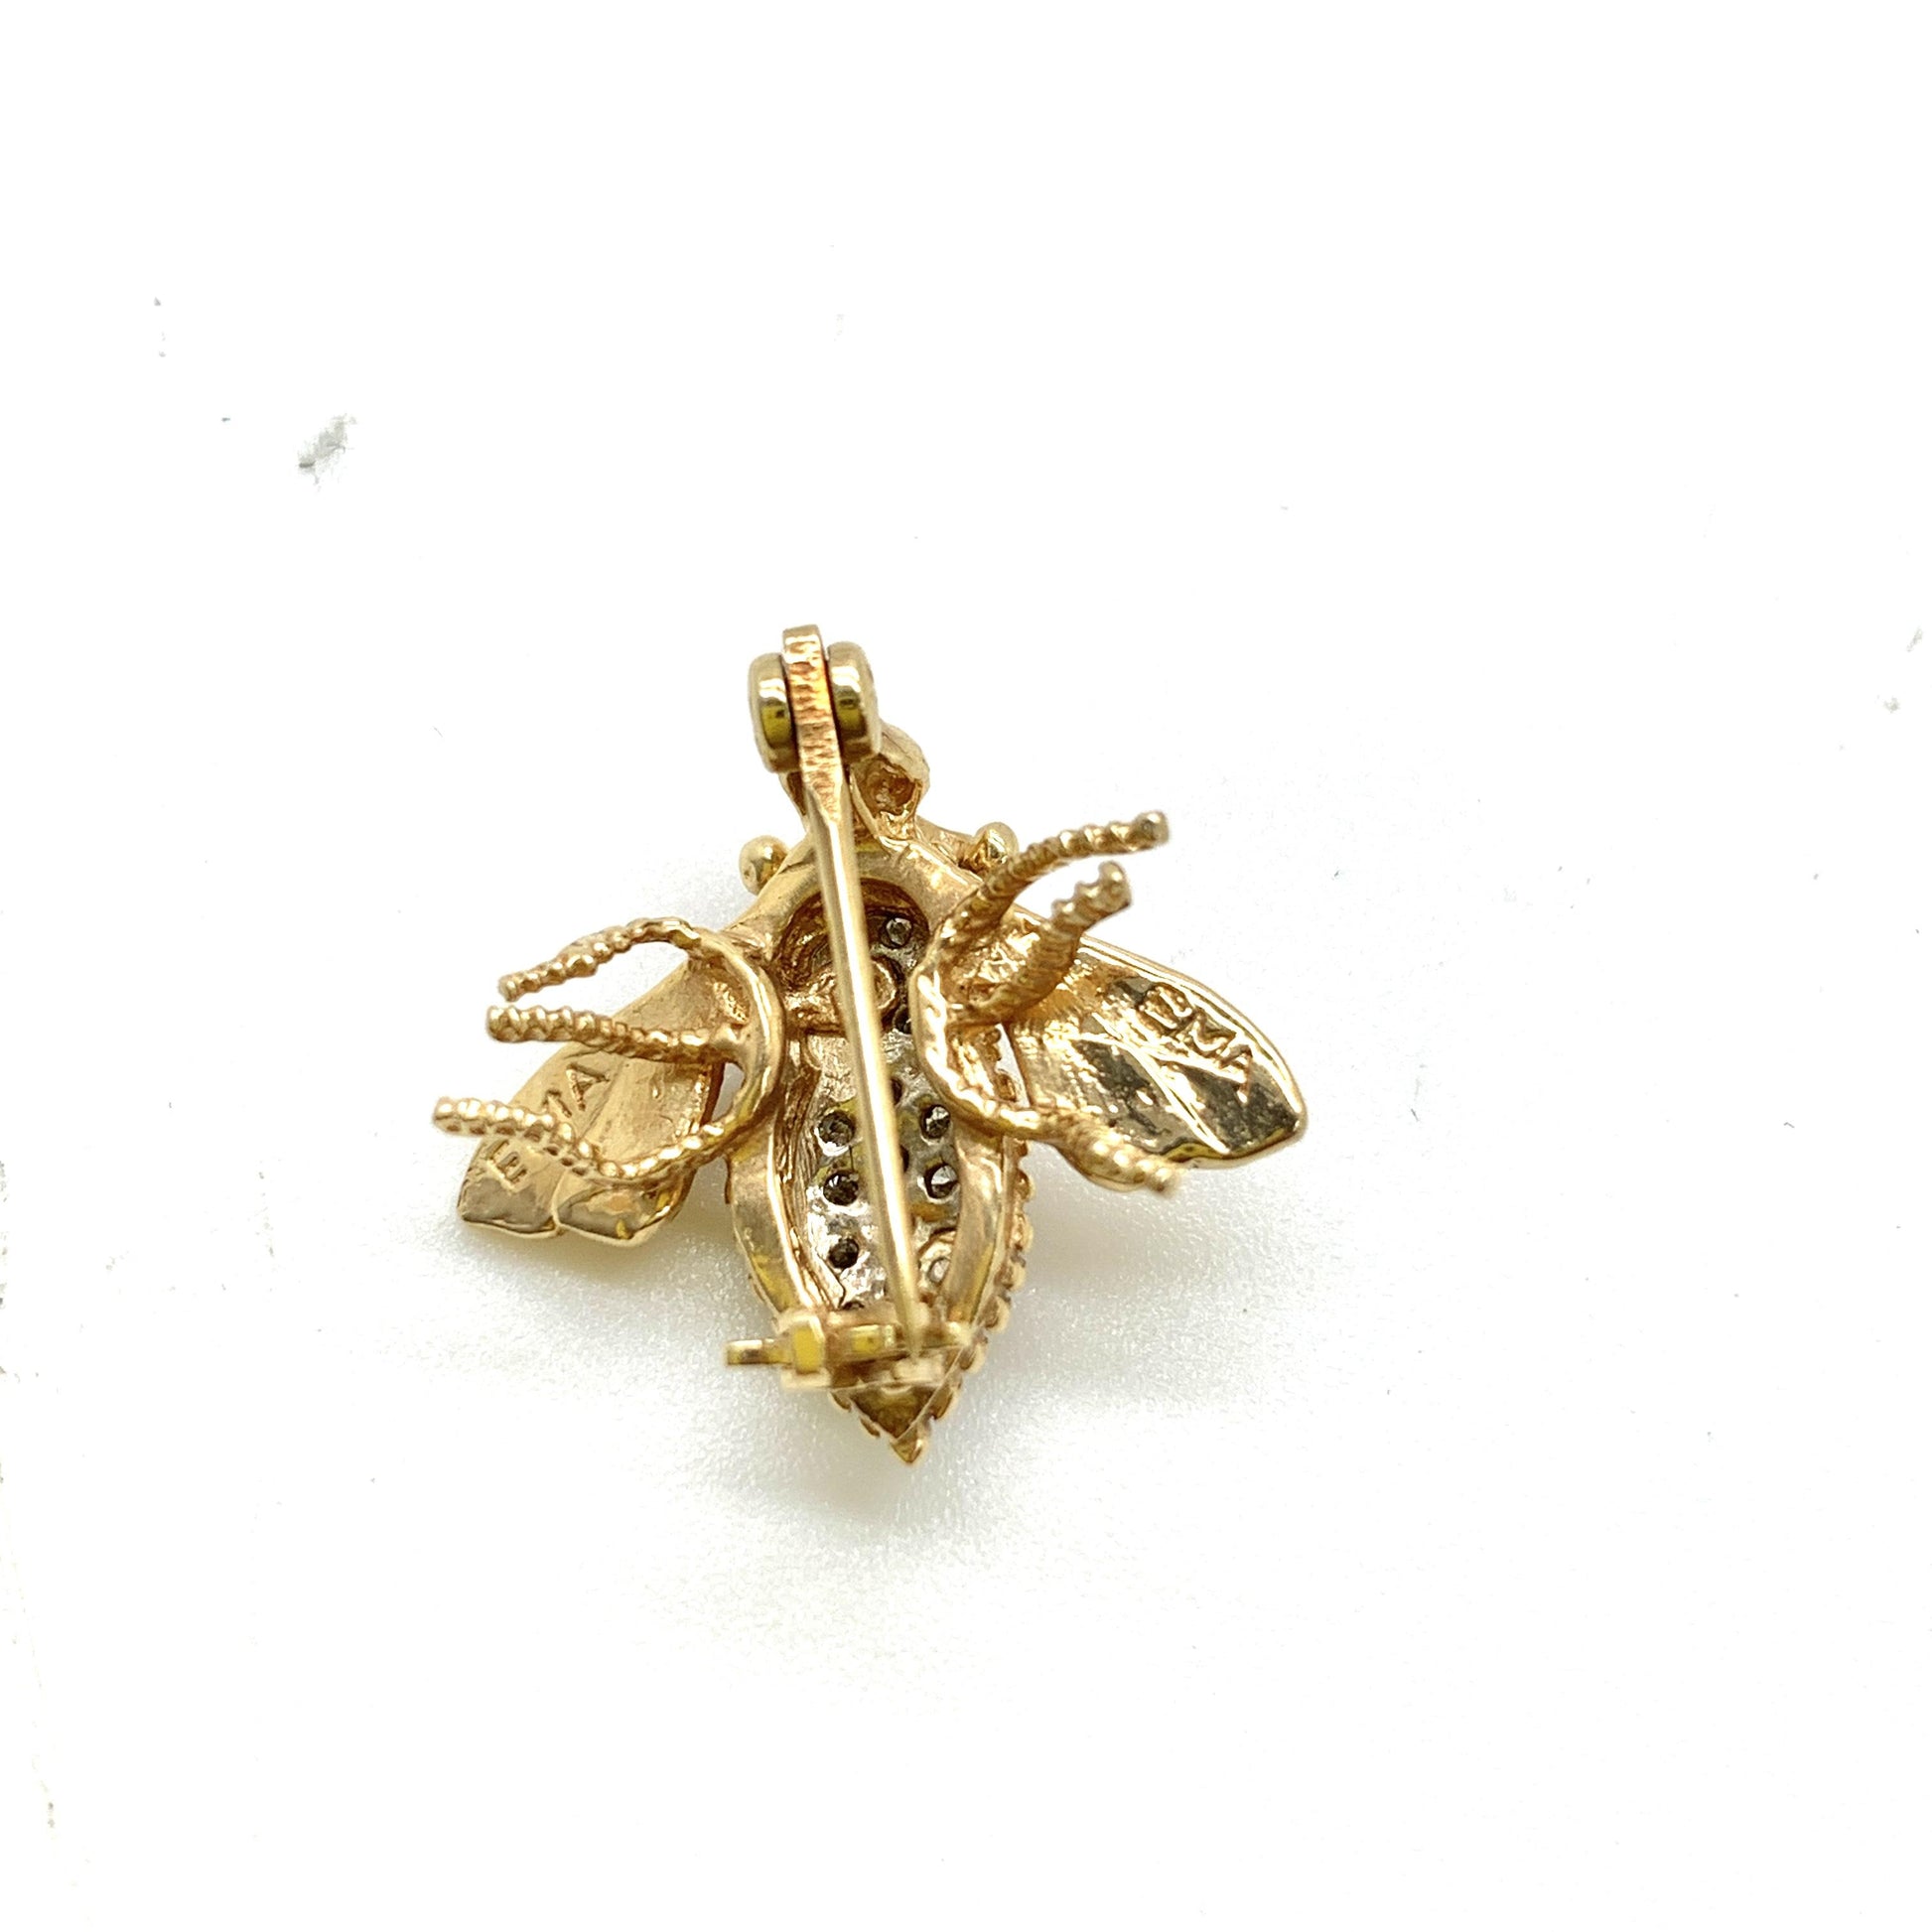 0.27 cttw Queen Honey Bee Brooch Pin 14K Gold Pave Diamonds by EMA